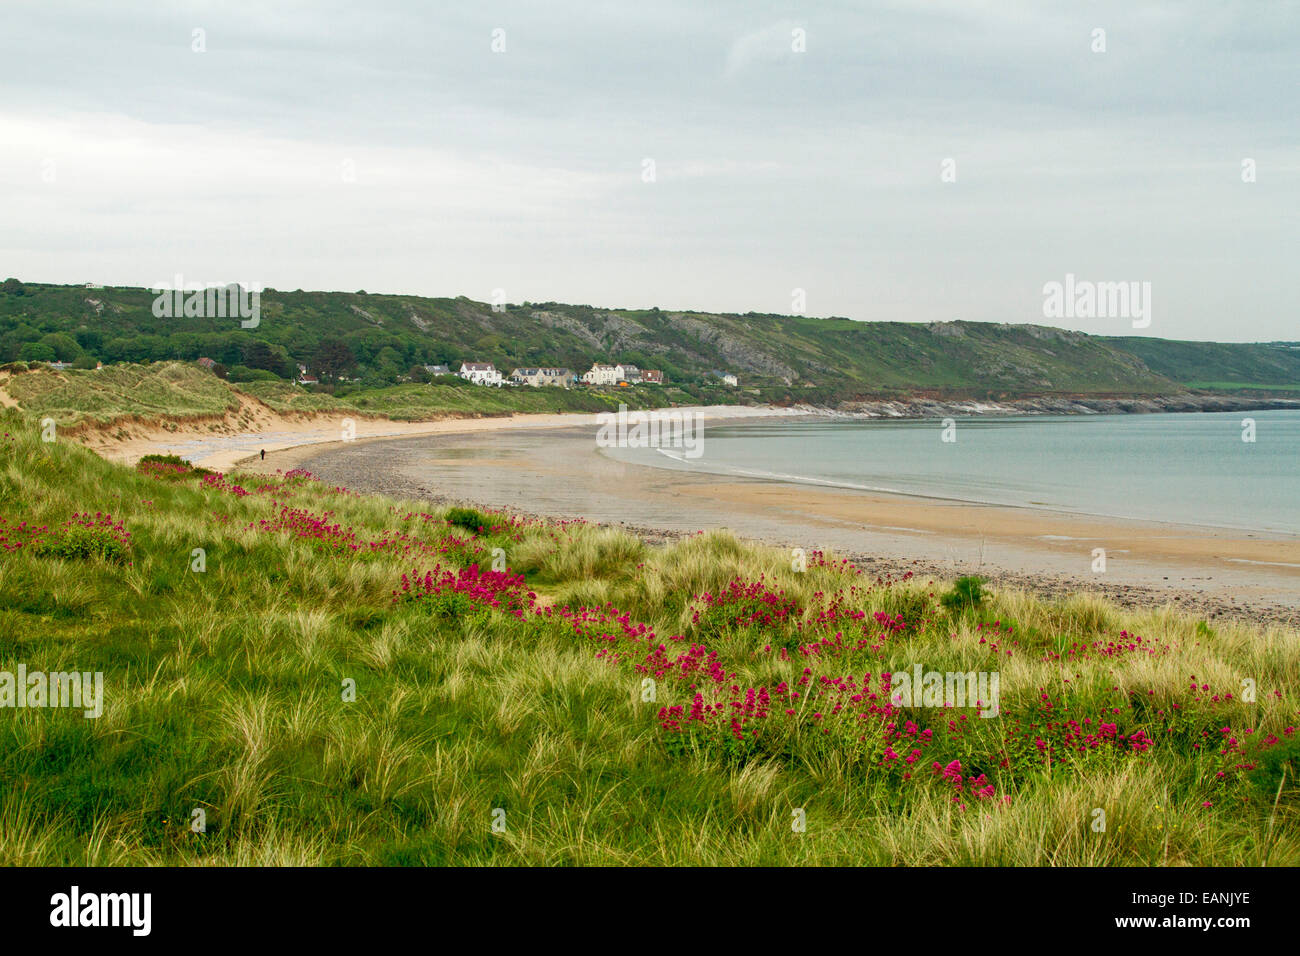 Sandy beach and wide bay with emerald grass and red Valerian wildflowers on low dunes near village of Port Eynon, Wales Stock Photo